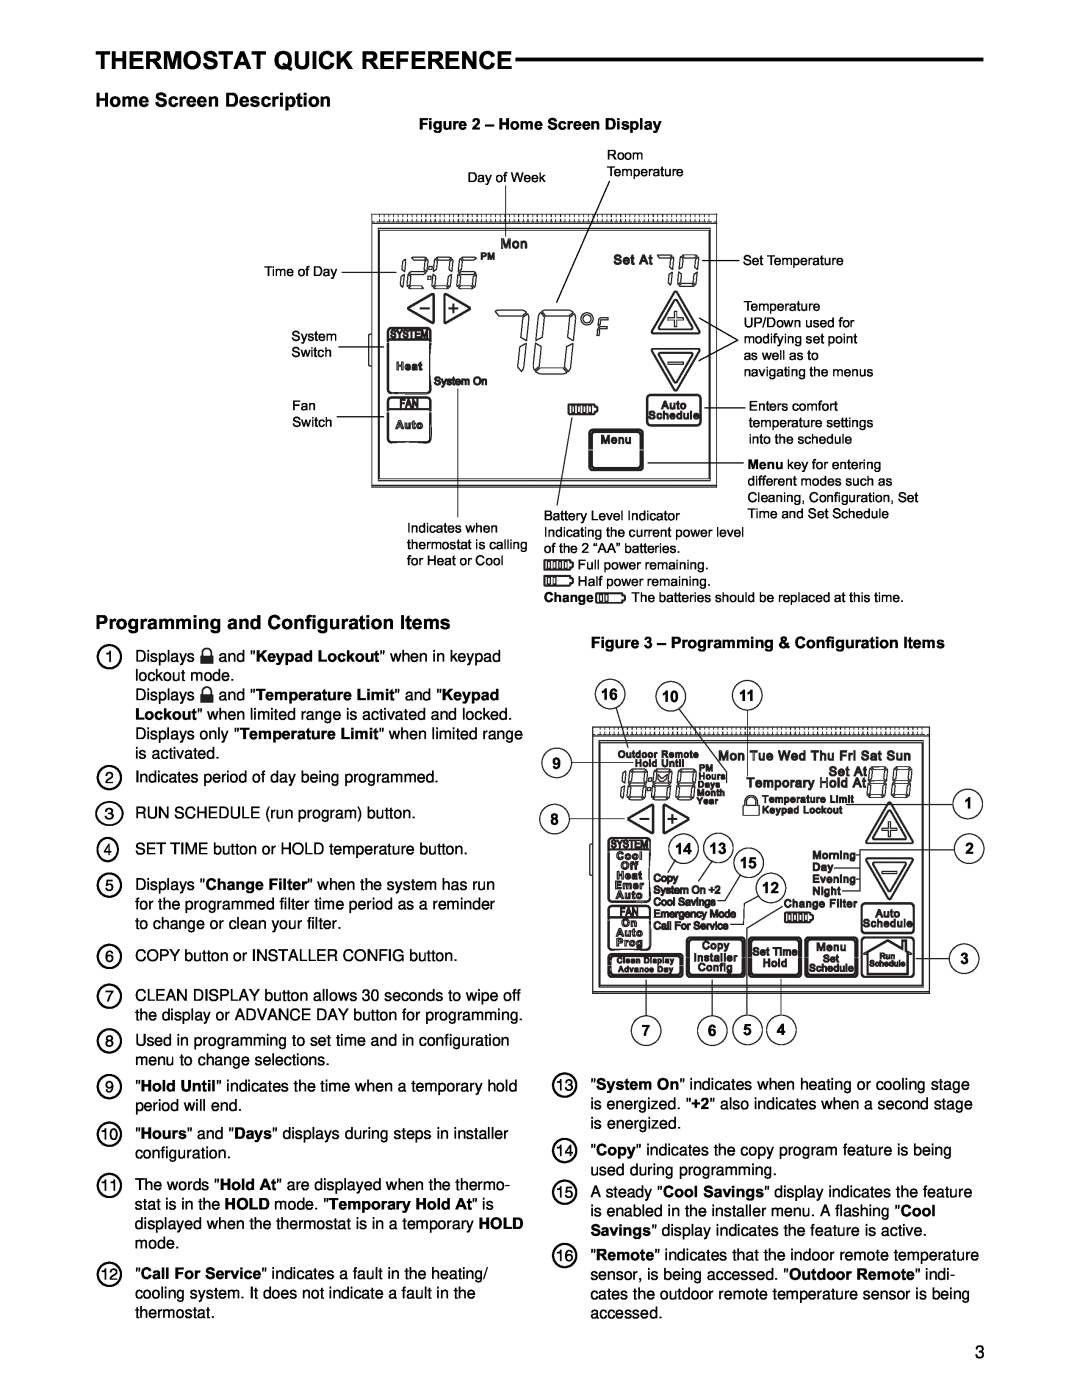 White Rodgers 1F95-1277 Thermostat Quick Reference, Home Screen Description, Programming and Configuration Items 